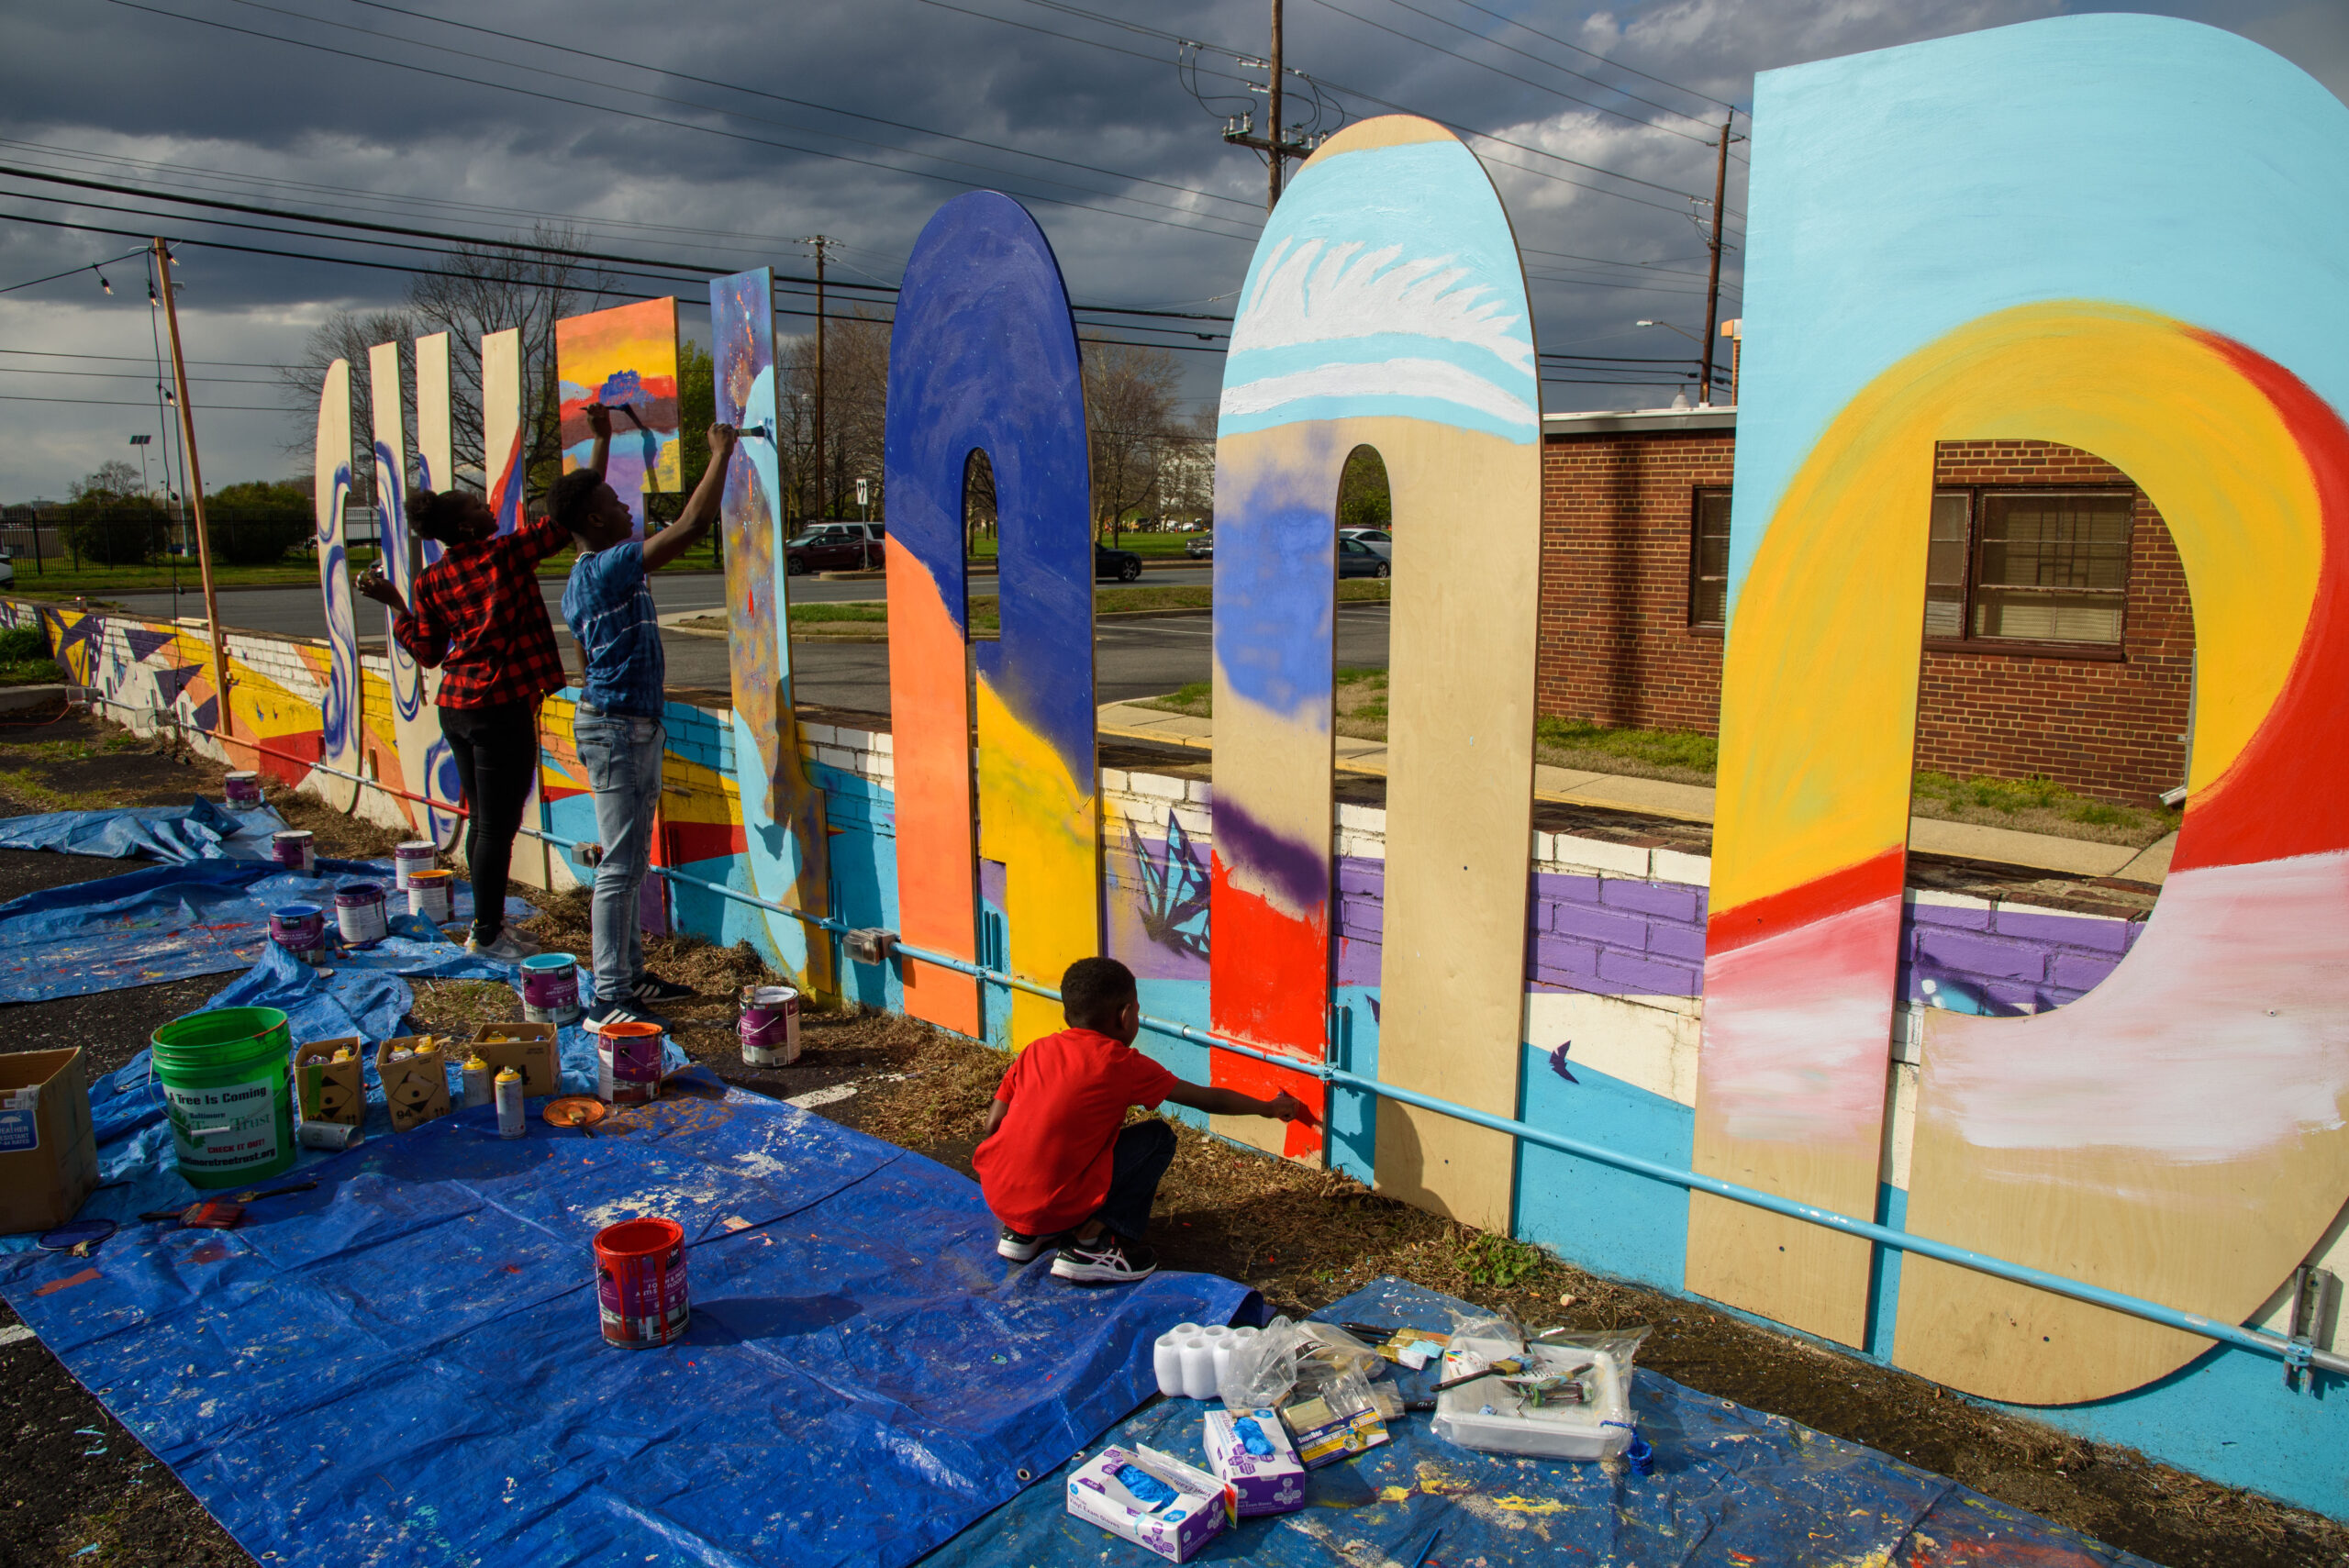 People painting a large wooden sign of their town name in Suitland, MD.